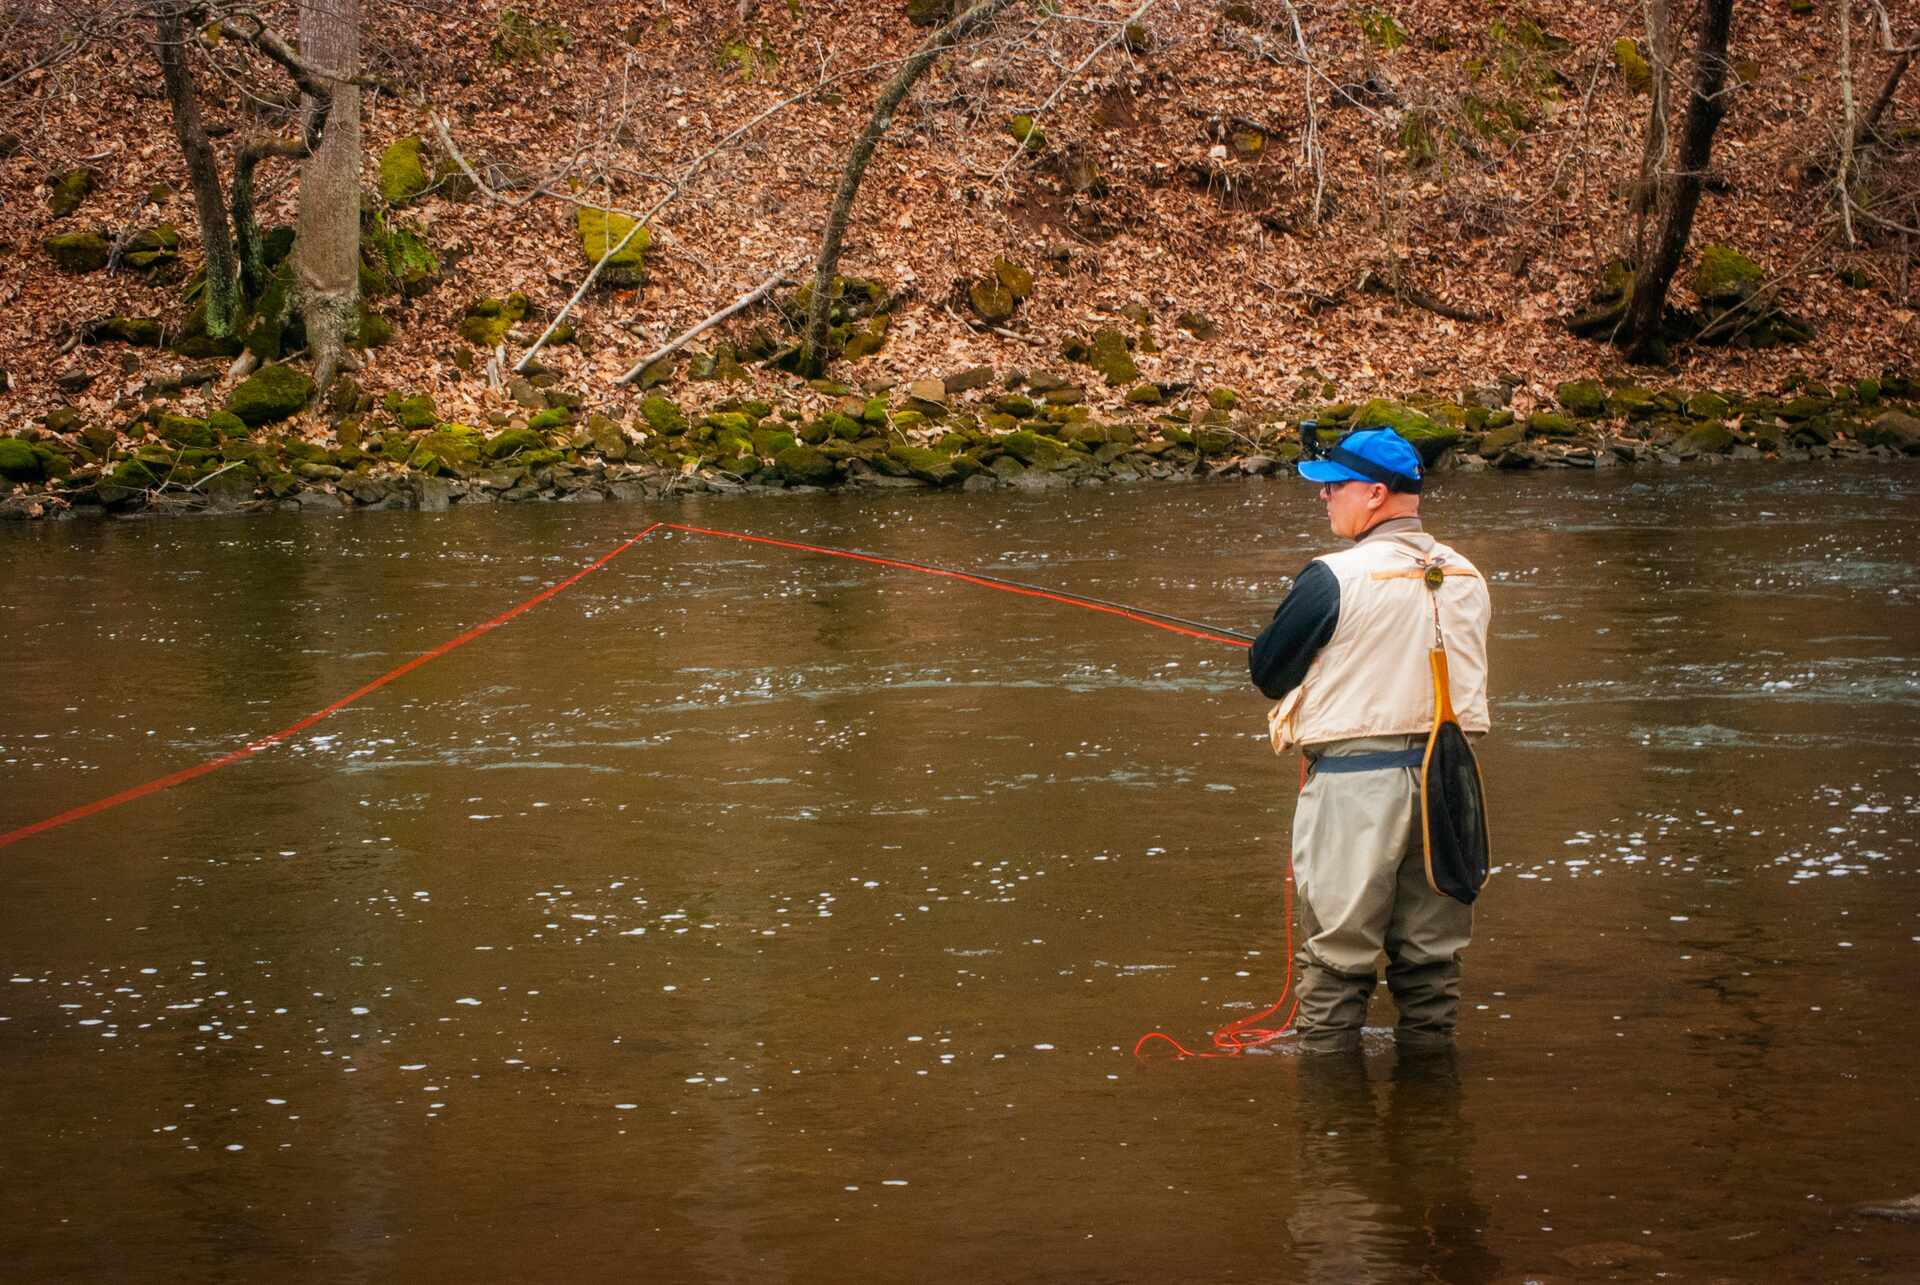 Man fly fishing in a small stream during fall